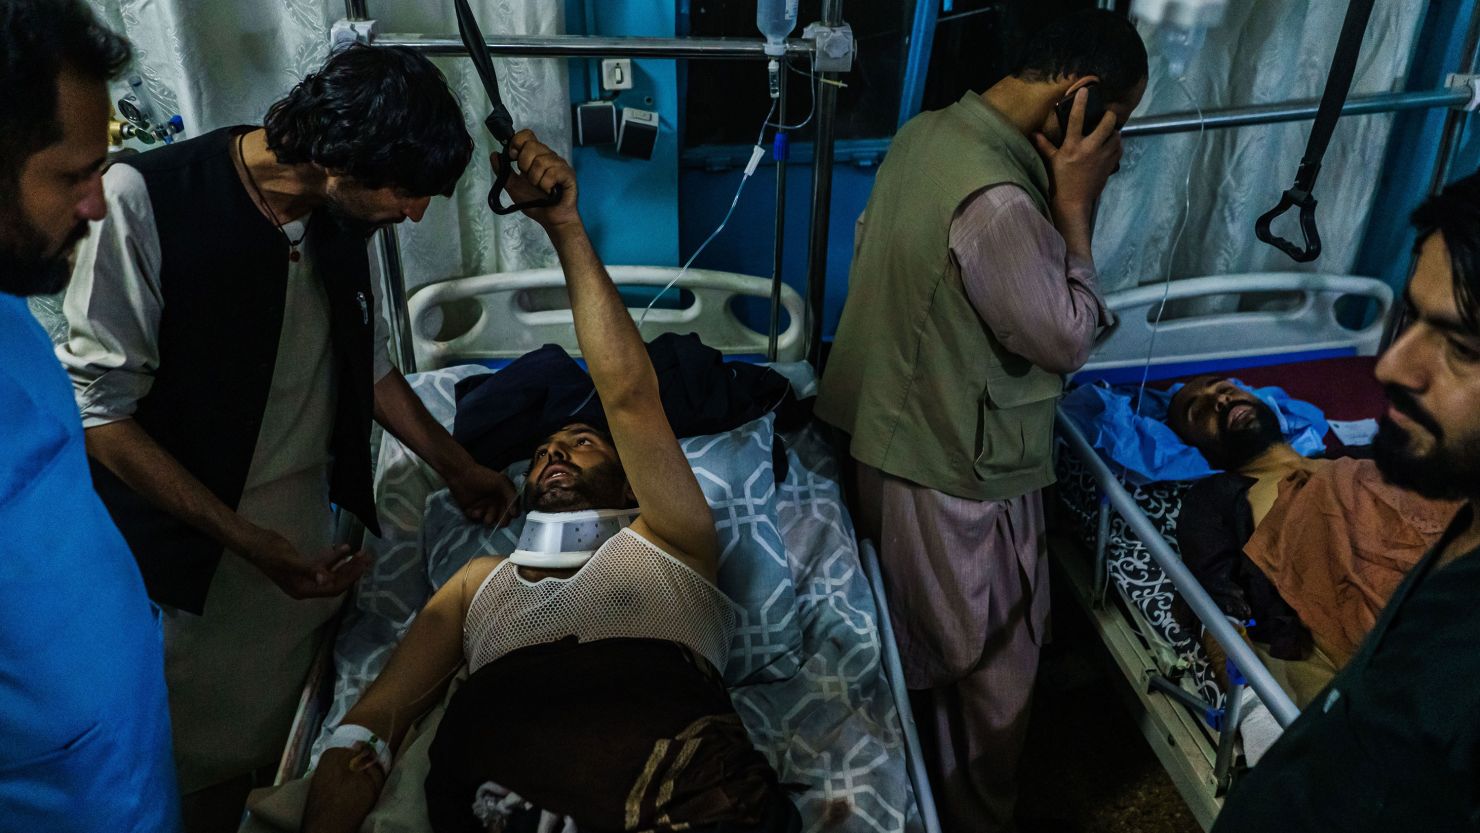 Family members visit wounded patients who had been admitted into Wazir Akbar Khan hospital. in Kabul, Afghanistan, Thursday, Aug. 26, 2021.